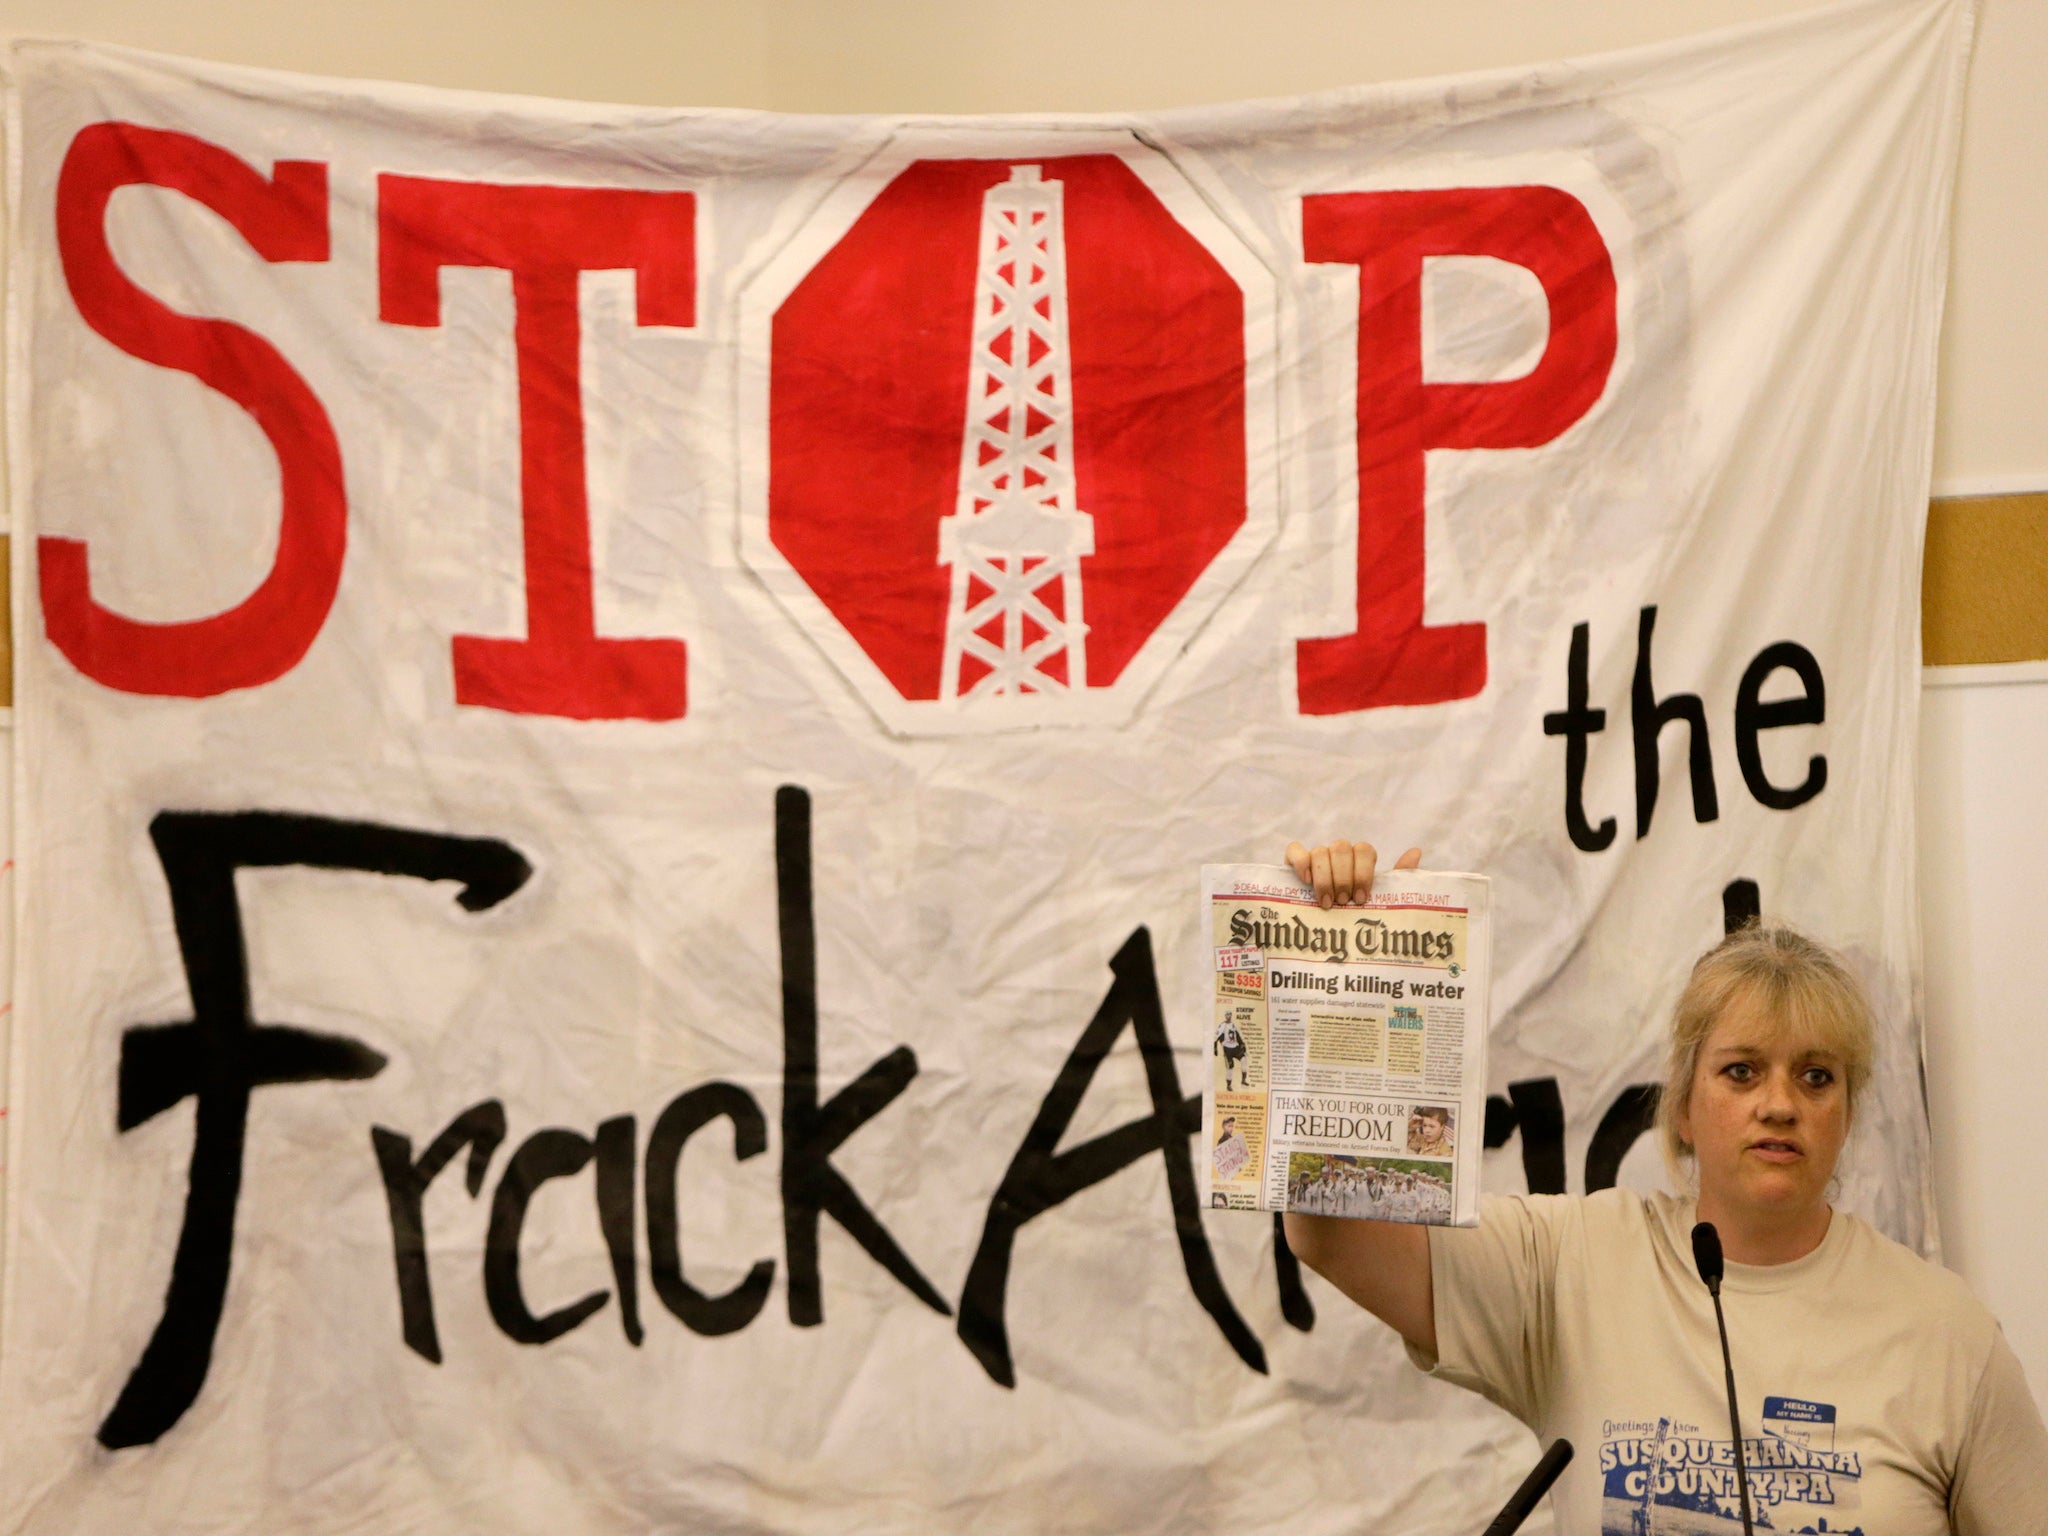 Campaigners against fracking in Pennsylvania